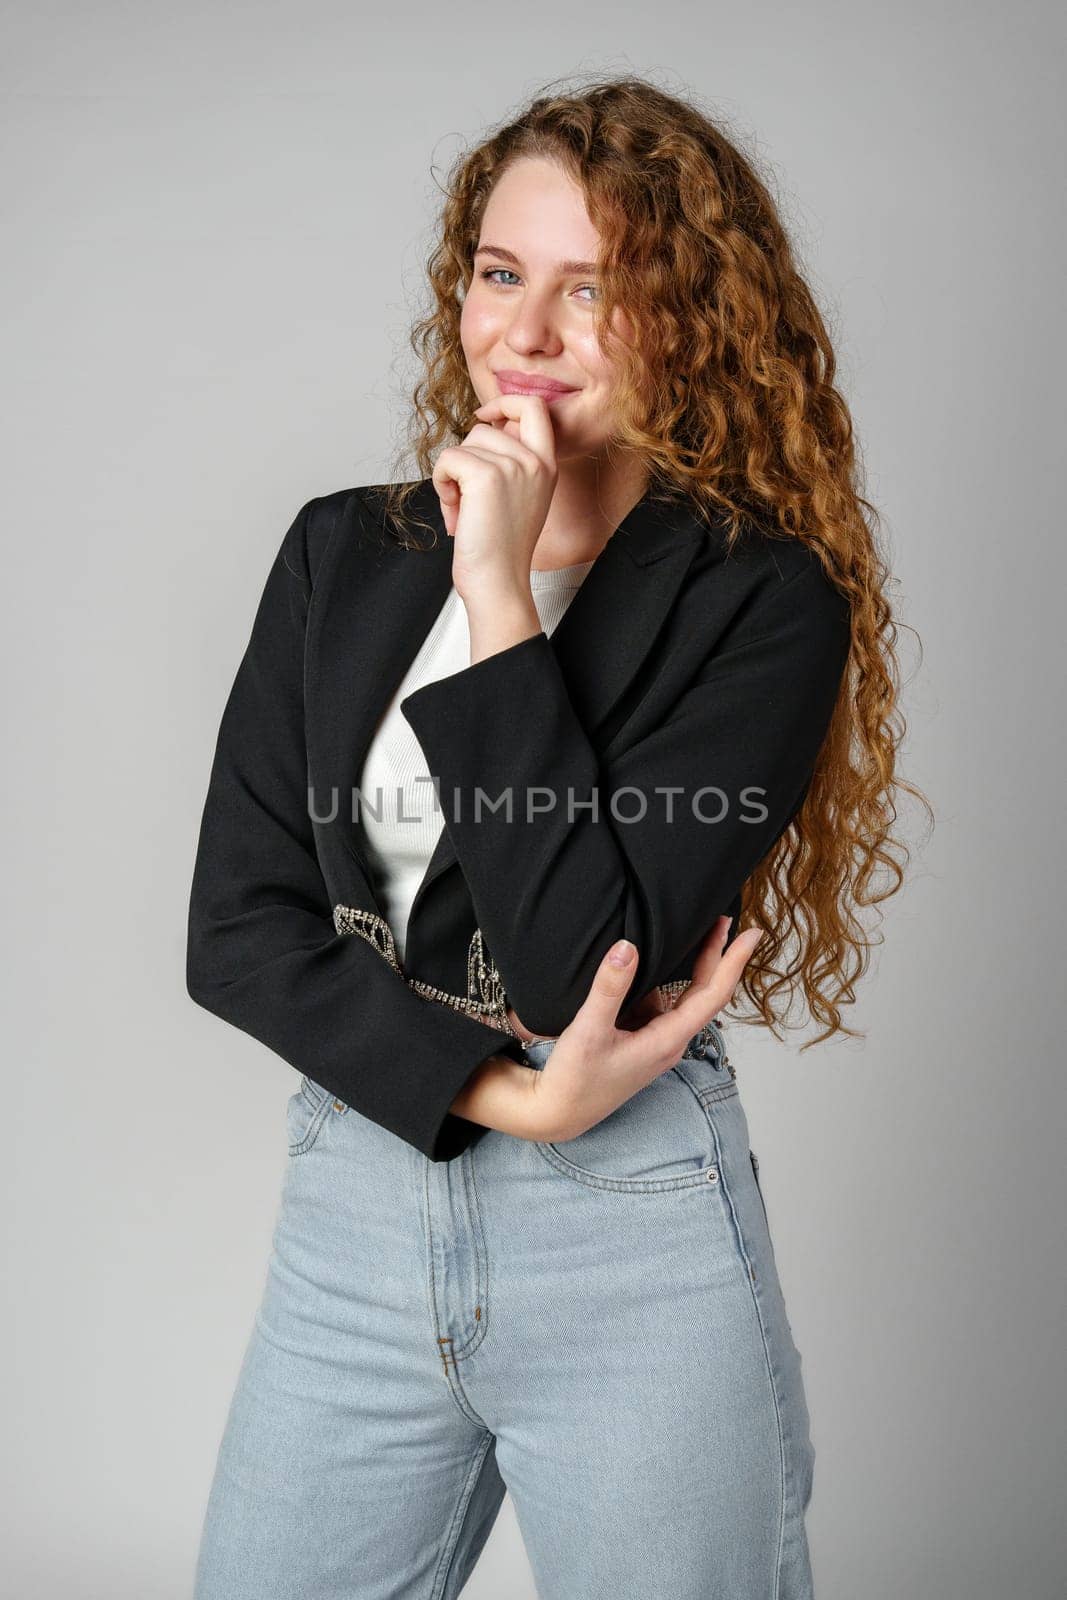 Thoughtful Young Woman Against Grey Background in Studio close up